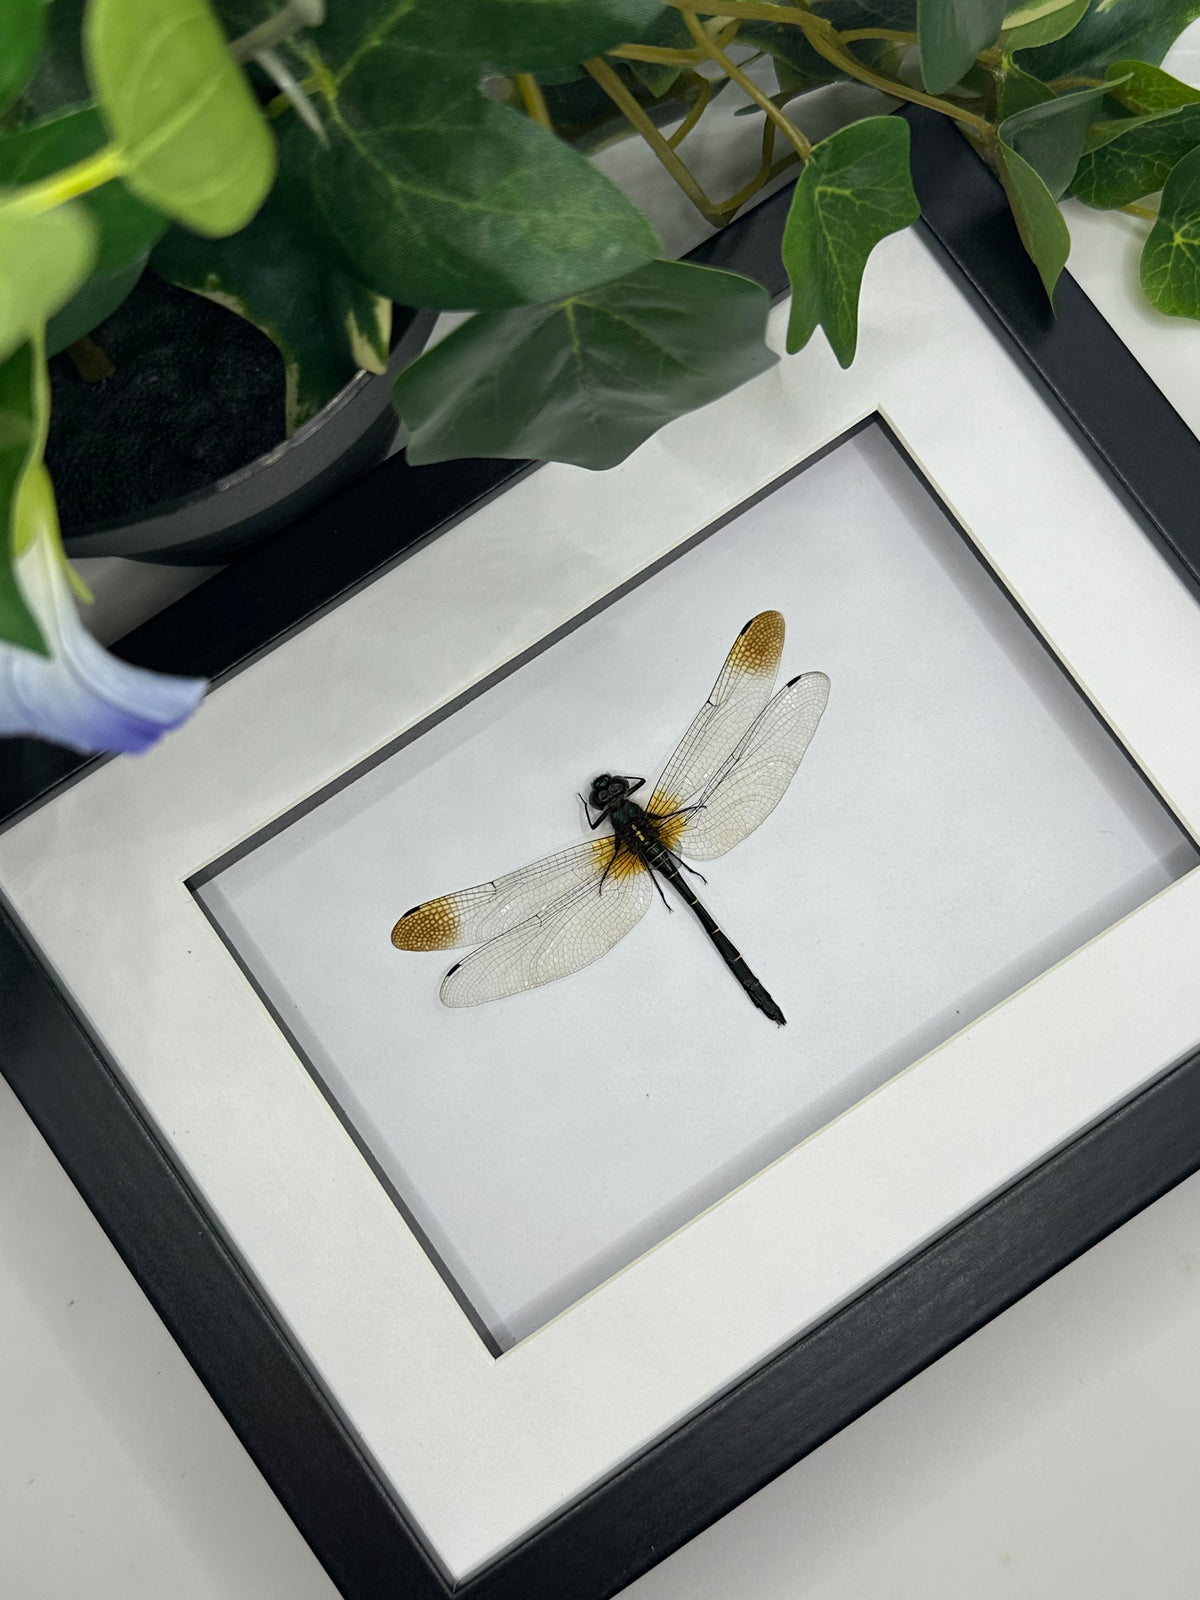 Java Dragonfly sp. in a frame